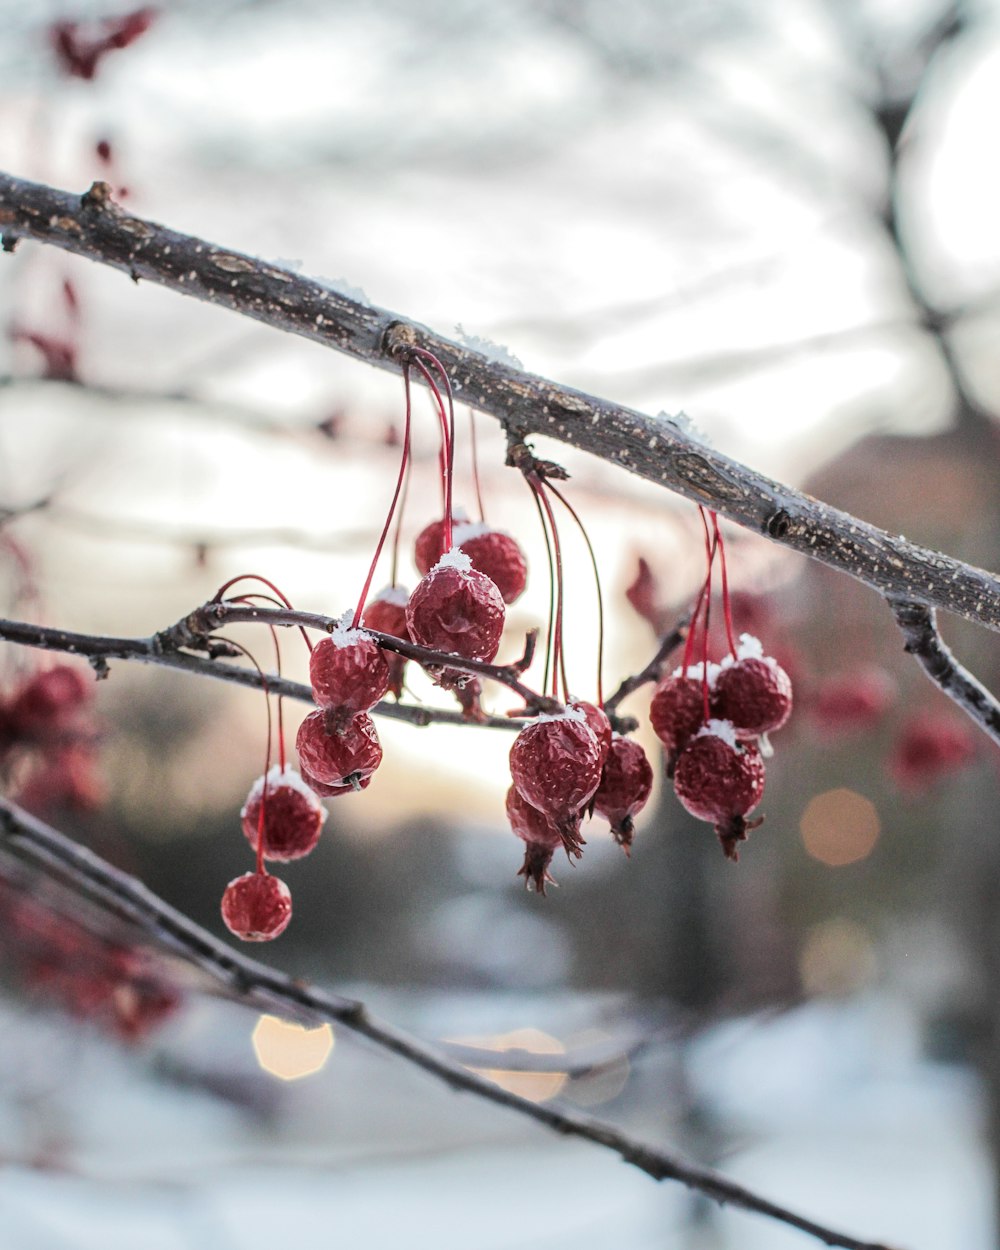 berries are hanging from a tree branch in the snow